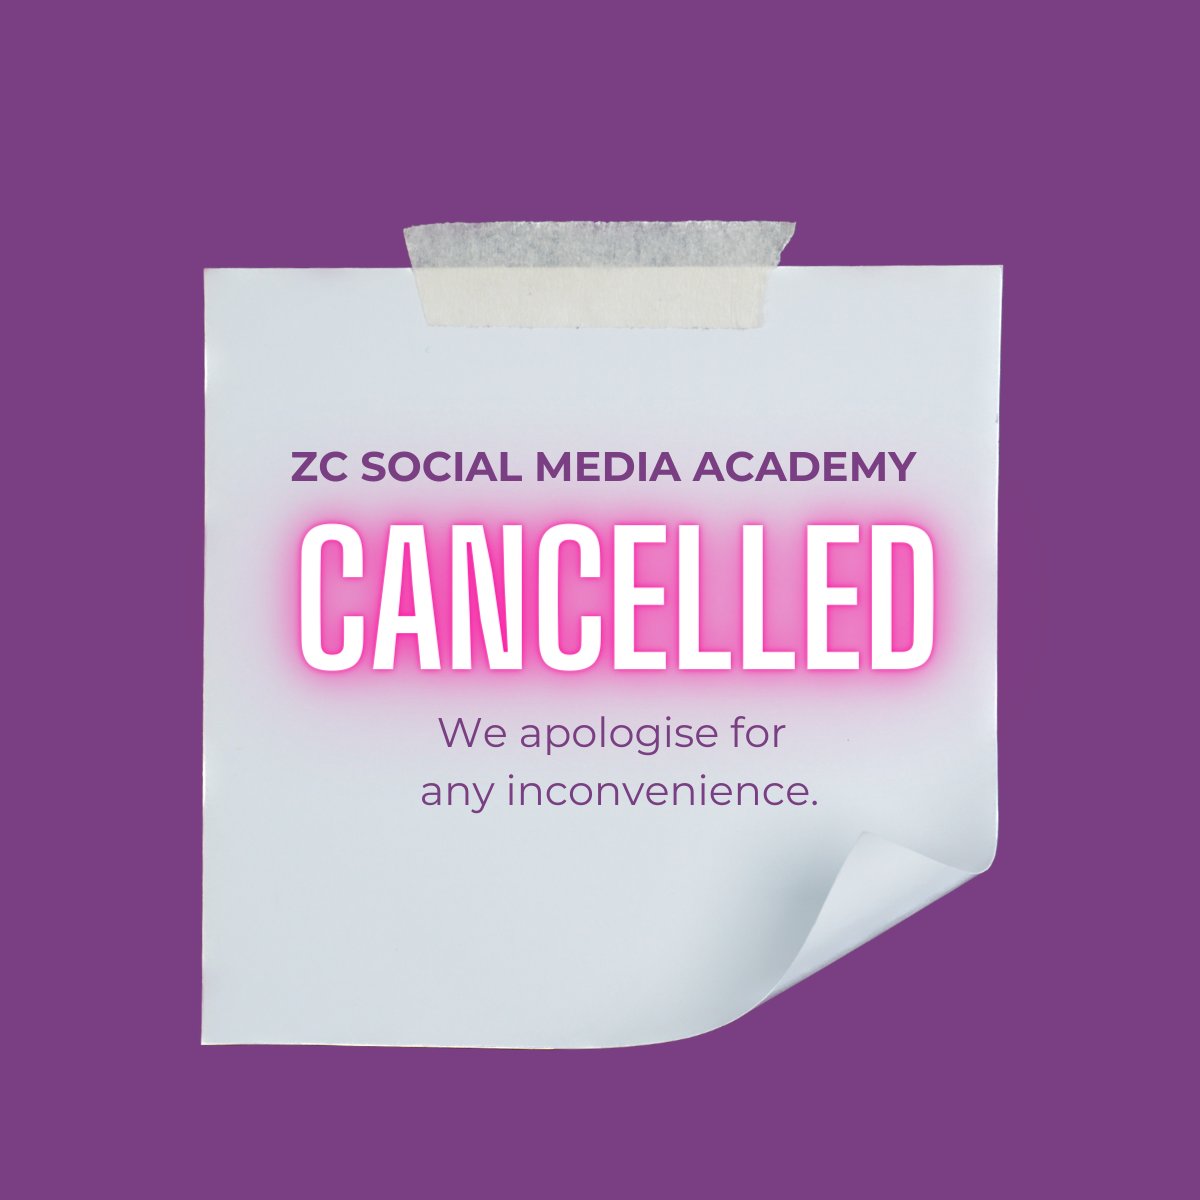 ZC Social Media Academy has been CANCELLED Due to unforeseen circumstances, the ZC Social Media Academy, which was being held at the Bridgewood Manor Hotel from 4 to 6 p.m. today (18th April), has been sadly cancelled. Thank you for your understanding. #SocialMediaEvent #Kent